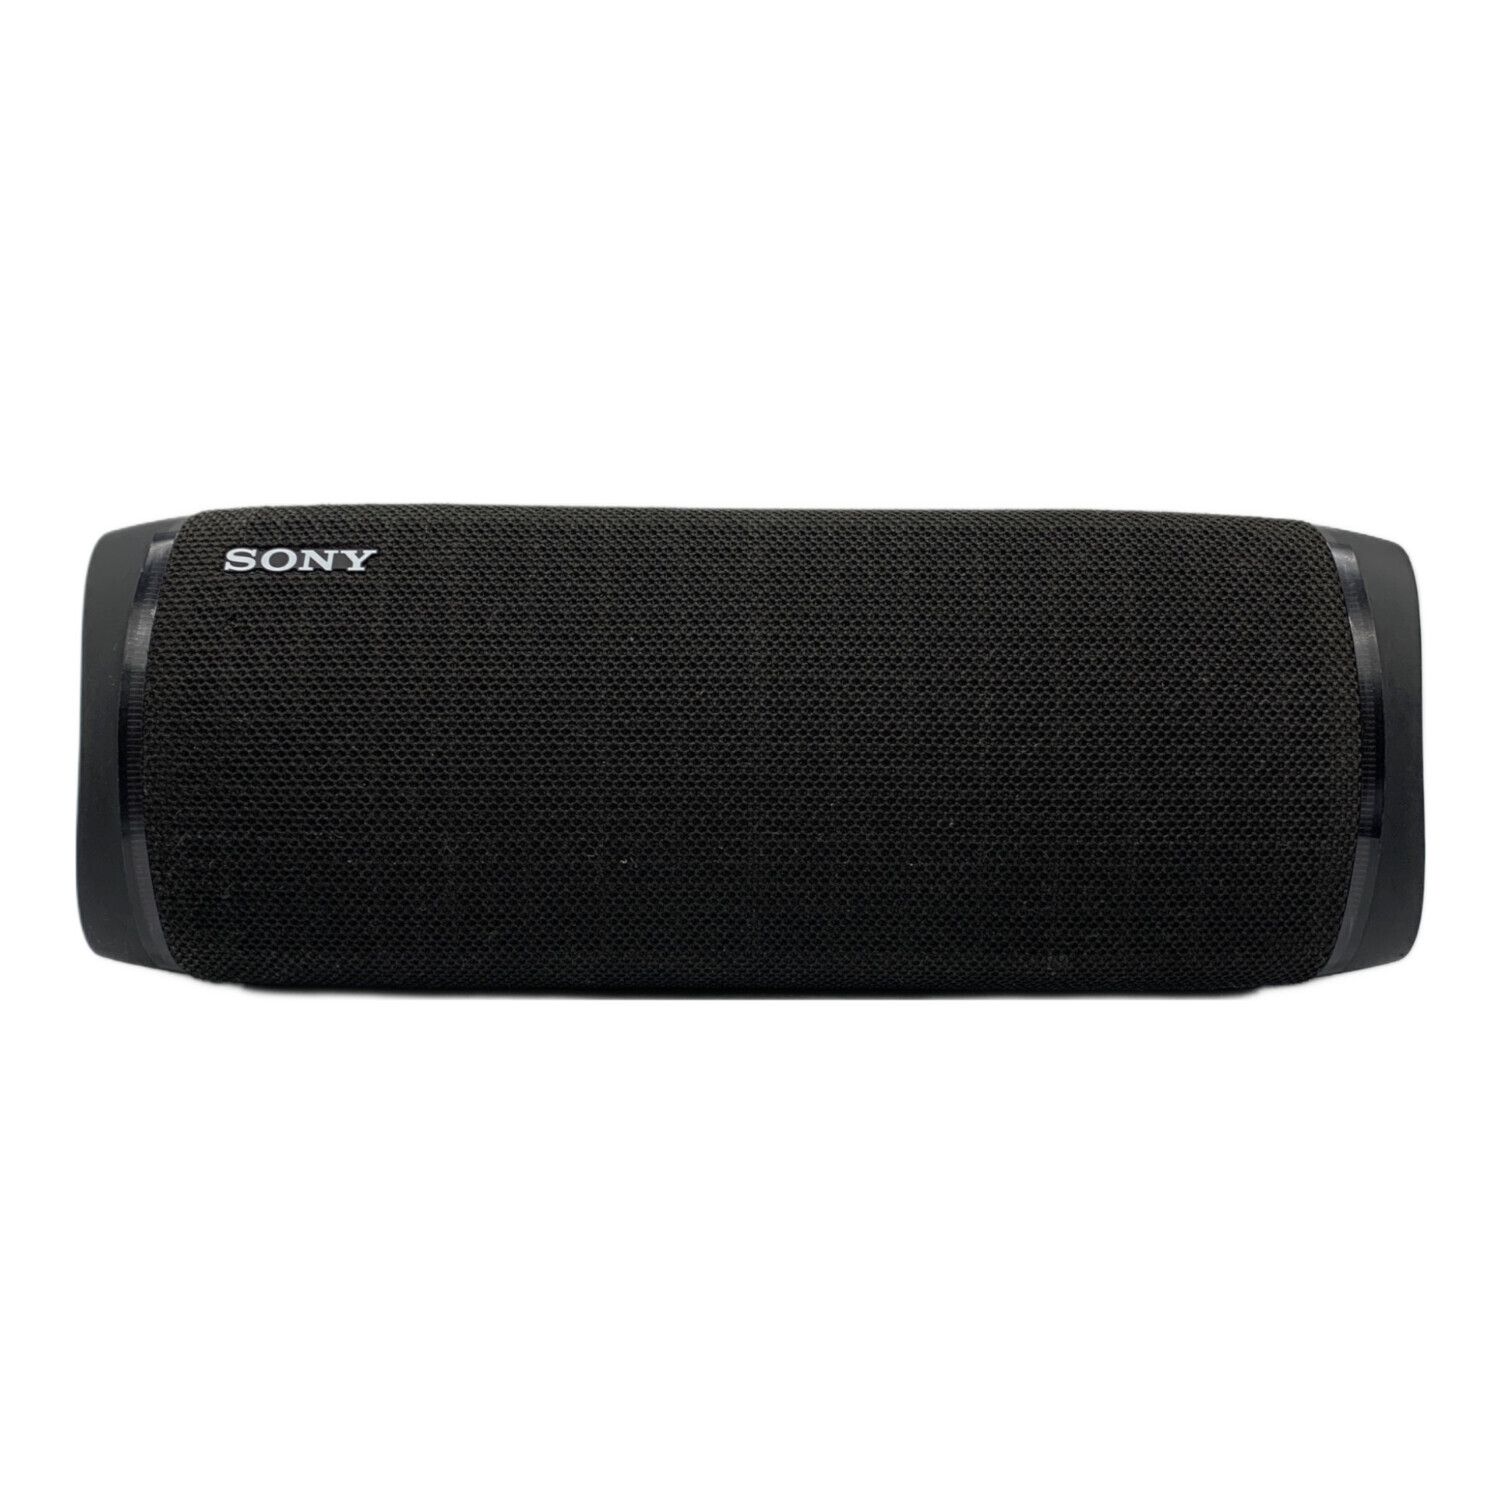 SONY (ソニー) ワイヤレススピーカー 2WAY Blue Tooth機能 SRS-XB43 2020年発売モデル｜トレファクONLINE